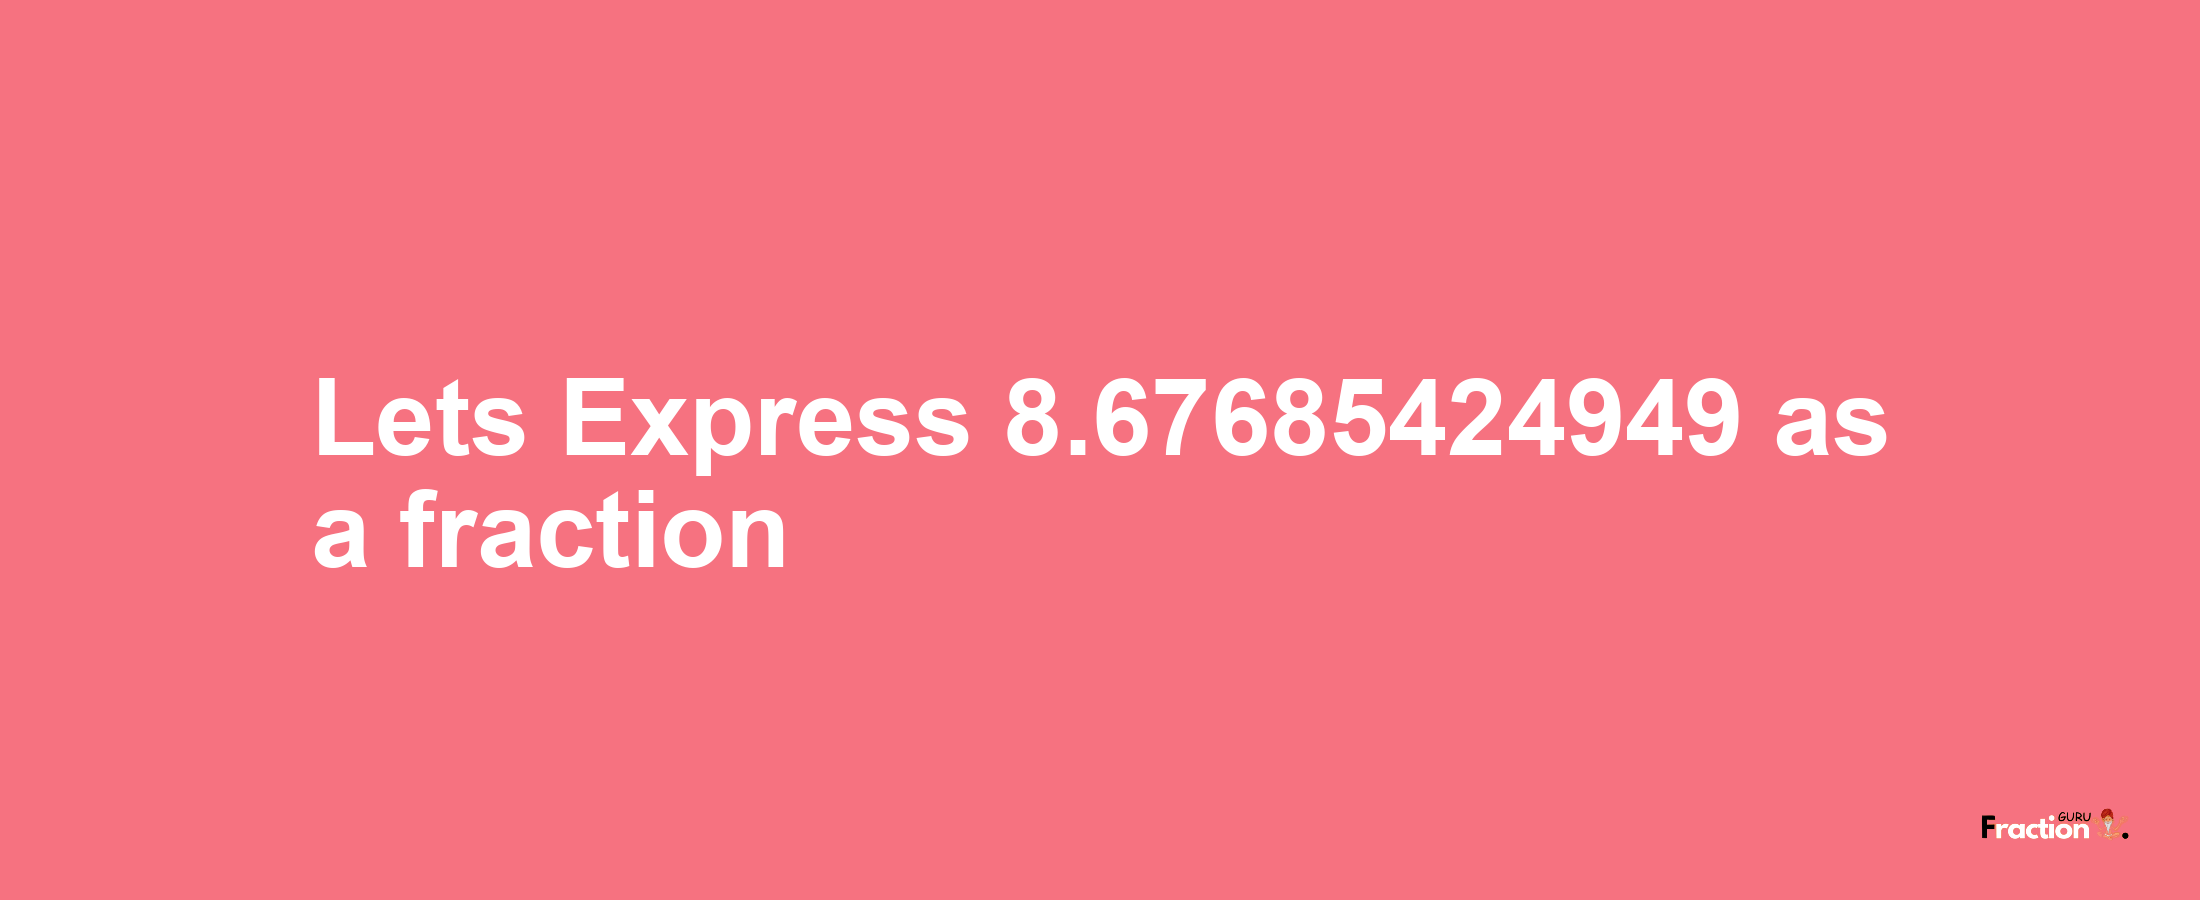 Lets Express 8.67685424949 as afraction